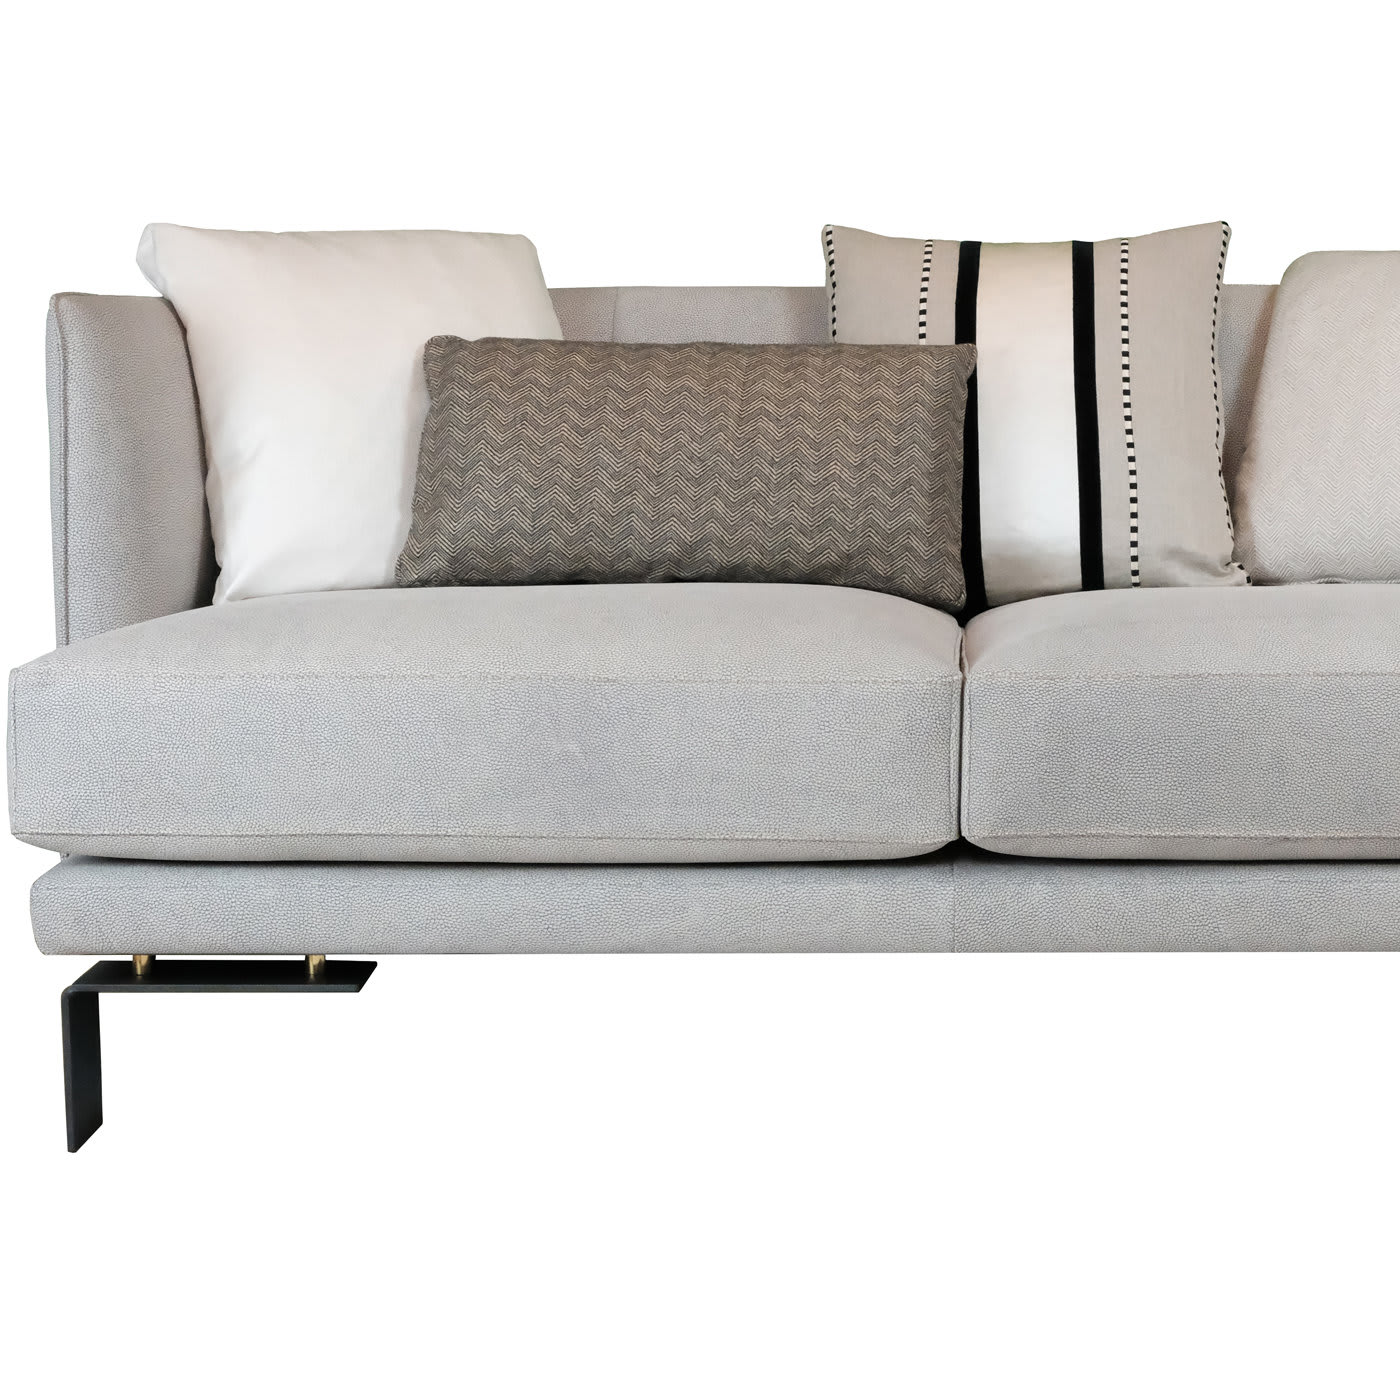 Met Beige Leather Sofa - Garbarino Collections